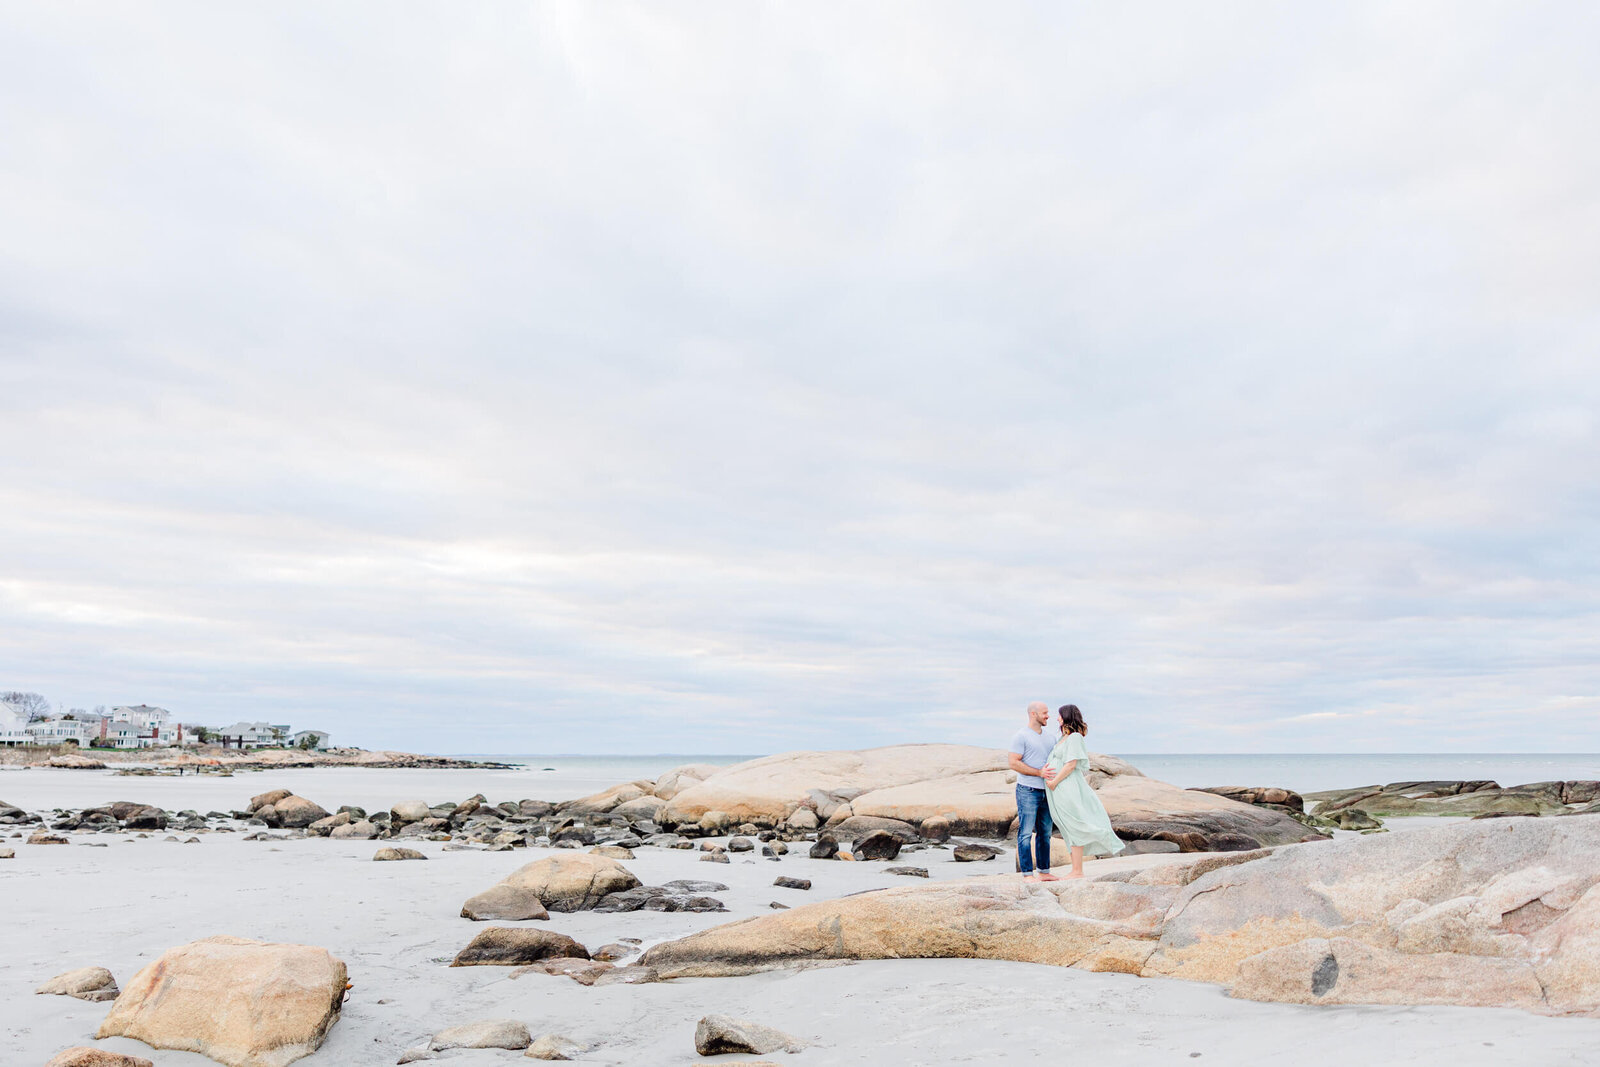 Epic view of a pregnant woman and her husband sharing a moment on top of a large rock with the ocean and cloudy sky in the background